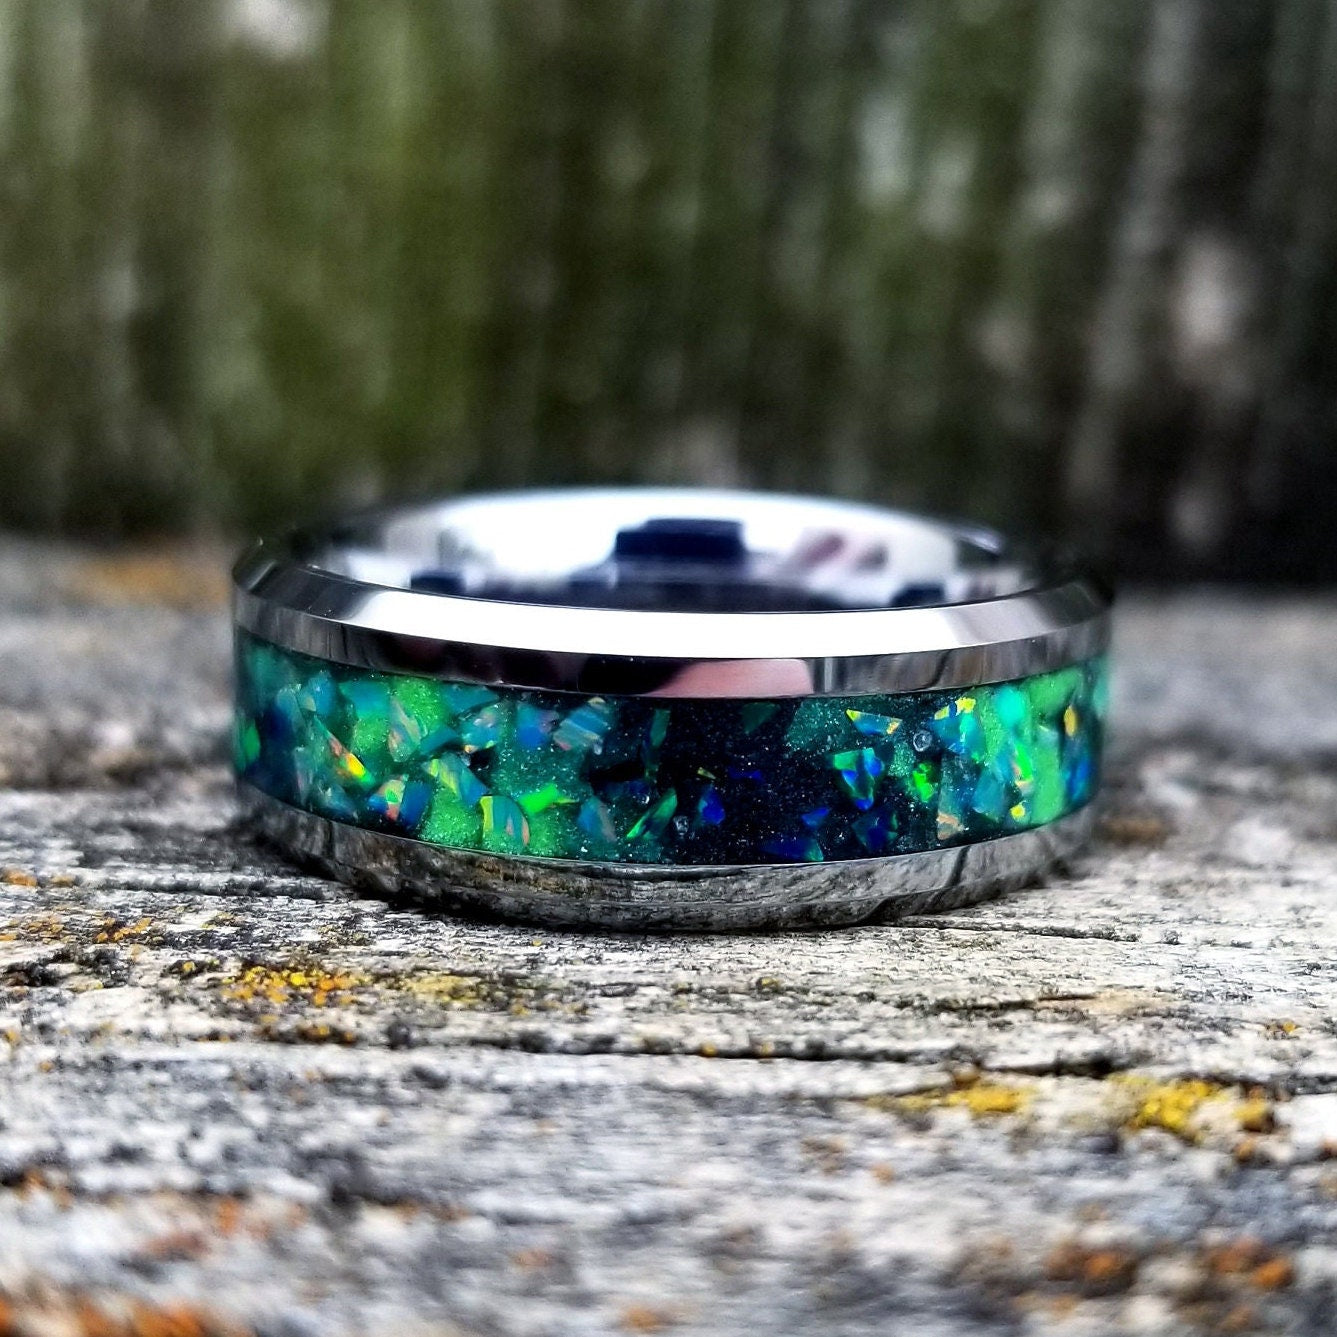 Galaxy opal ring. Tungsten carbide glow ring with forest green opal and  jade fire opal inlay. Men's ring. Sizes 5-13